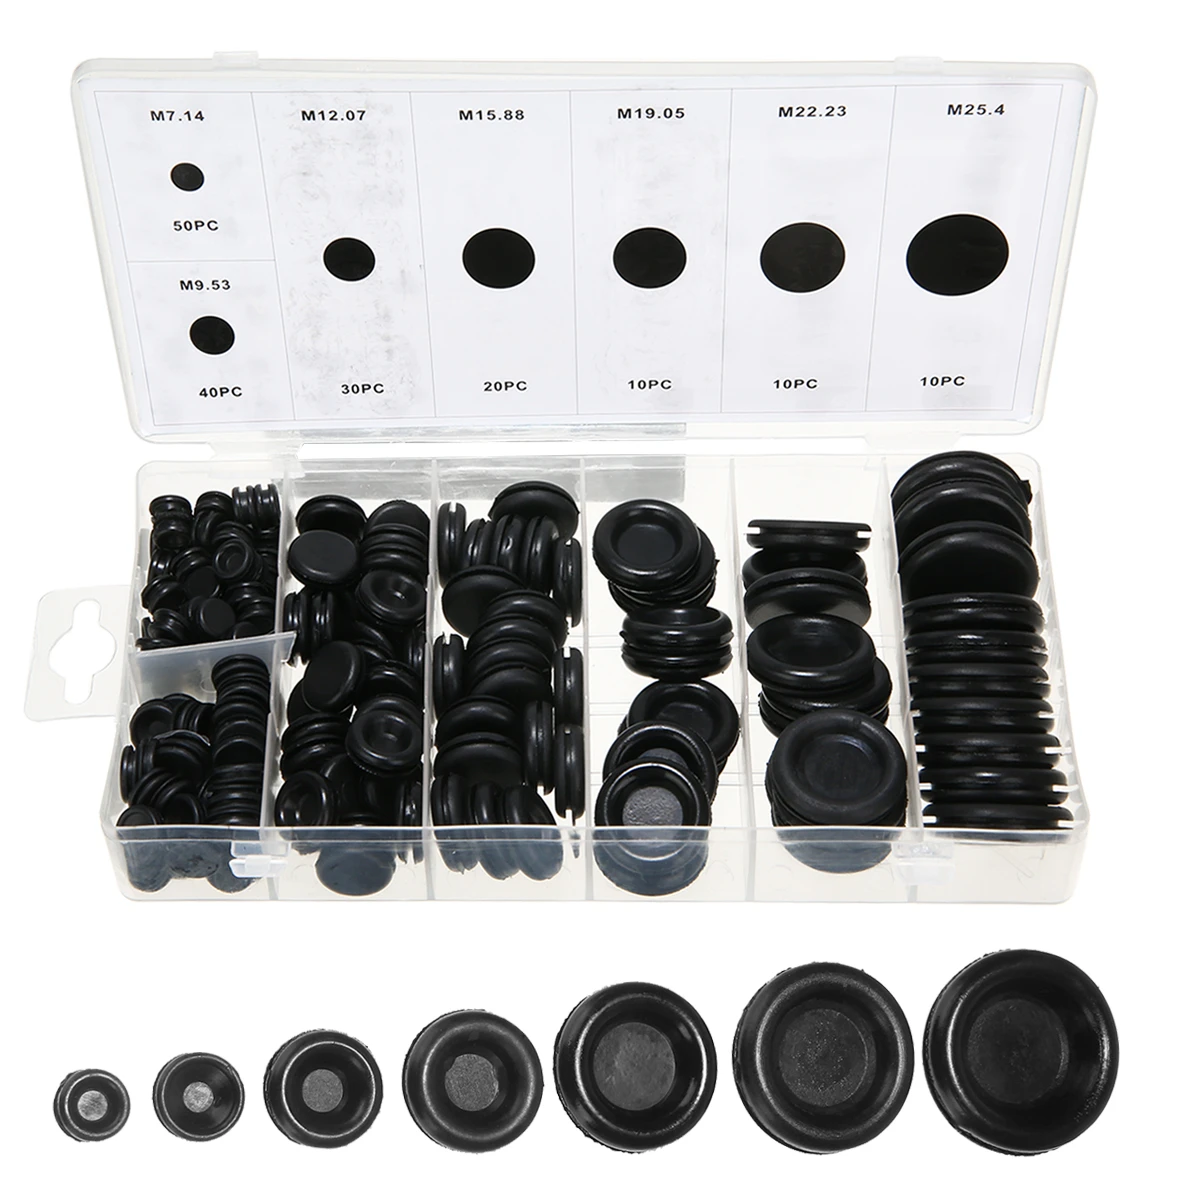 170pcs Black Closed Seal Ring Grommets Car Electrical Wiring Cable Gasket  Kit Rubber Grommet Hole Plug Set With Plastic Box - Grommets - AliExpress